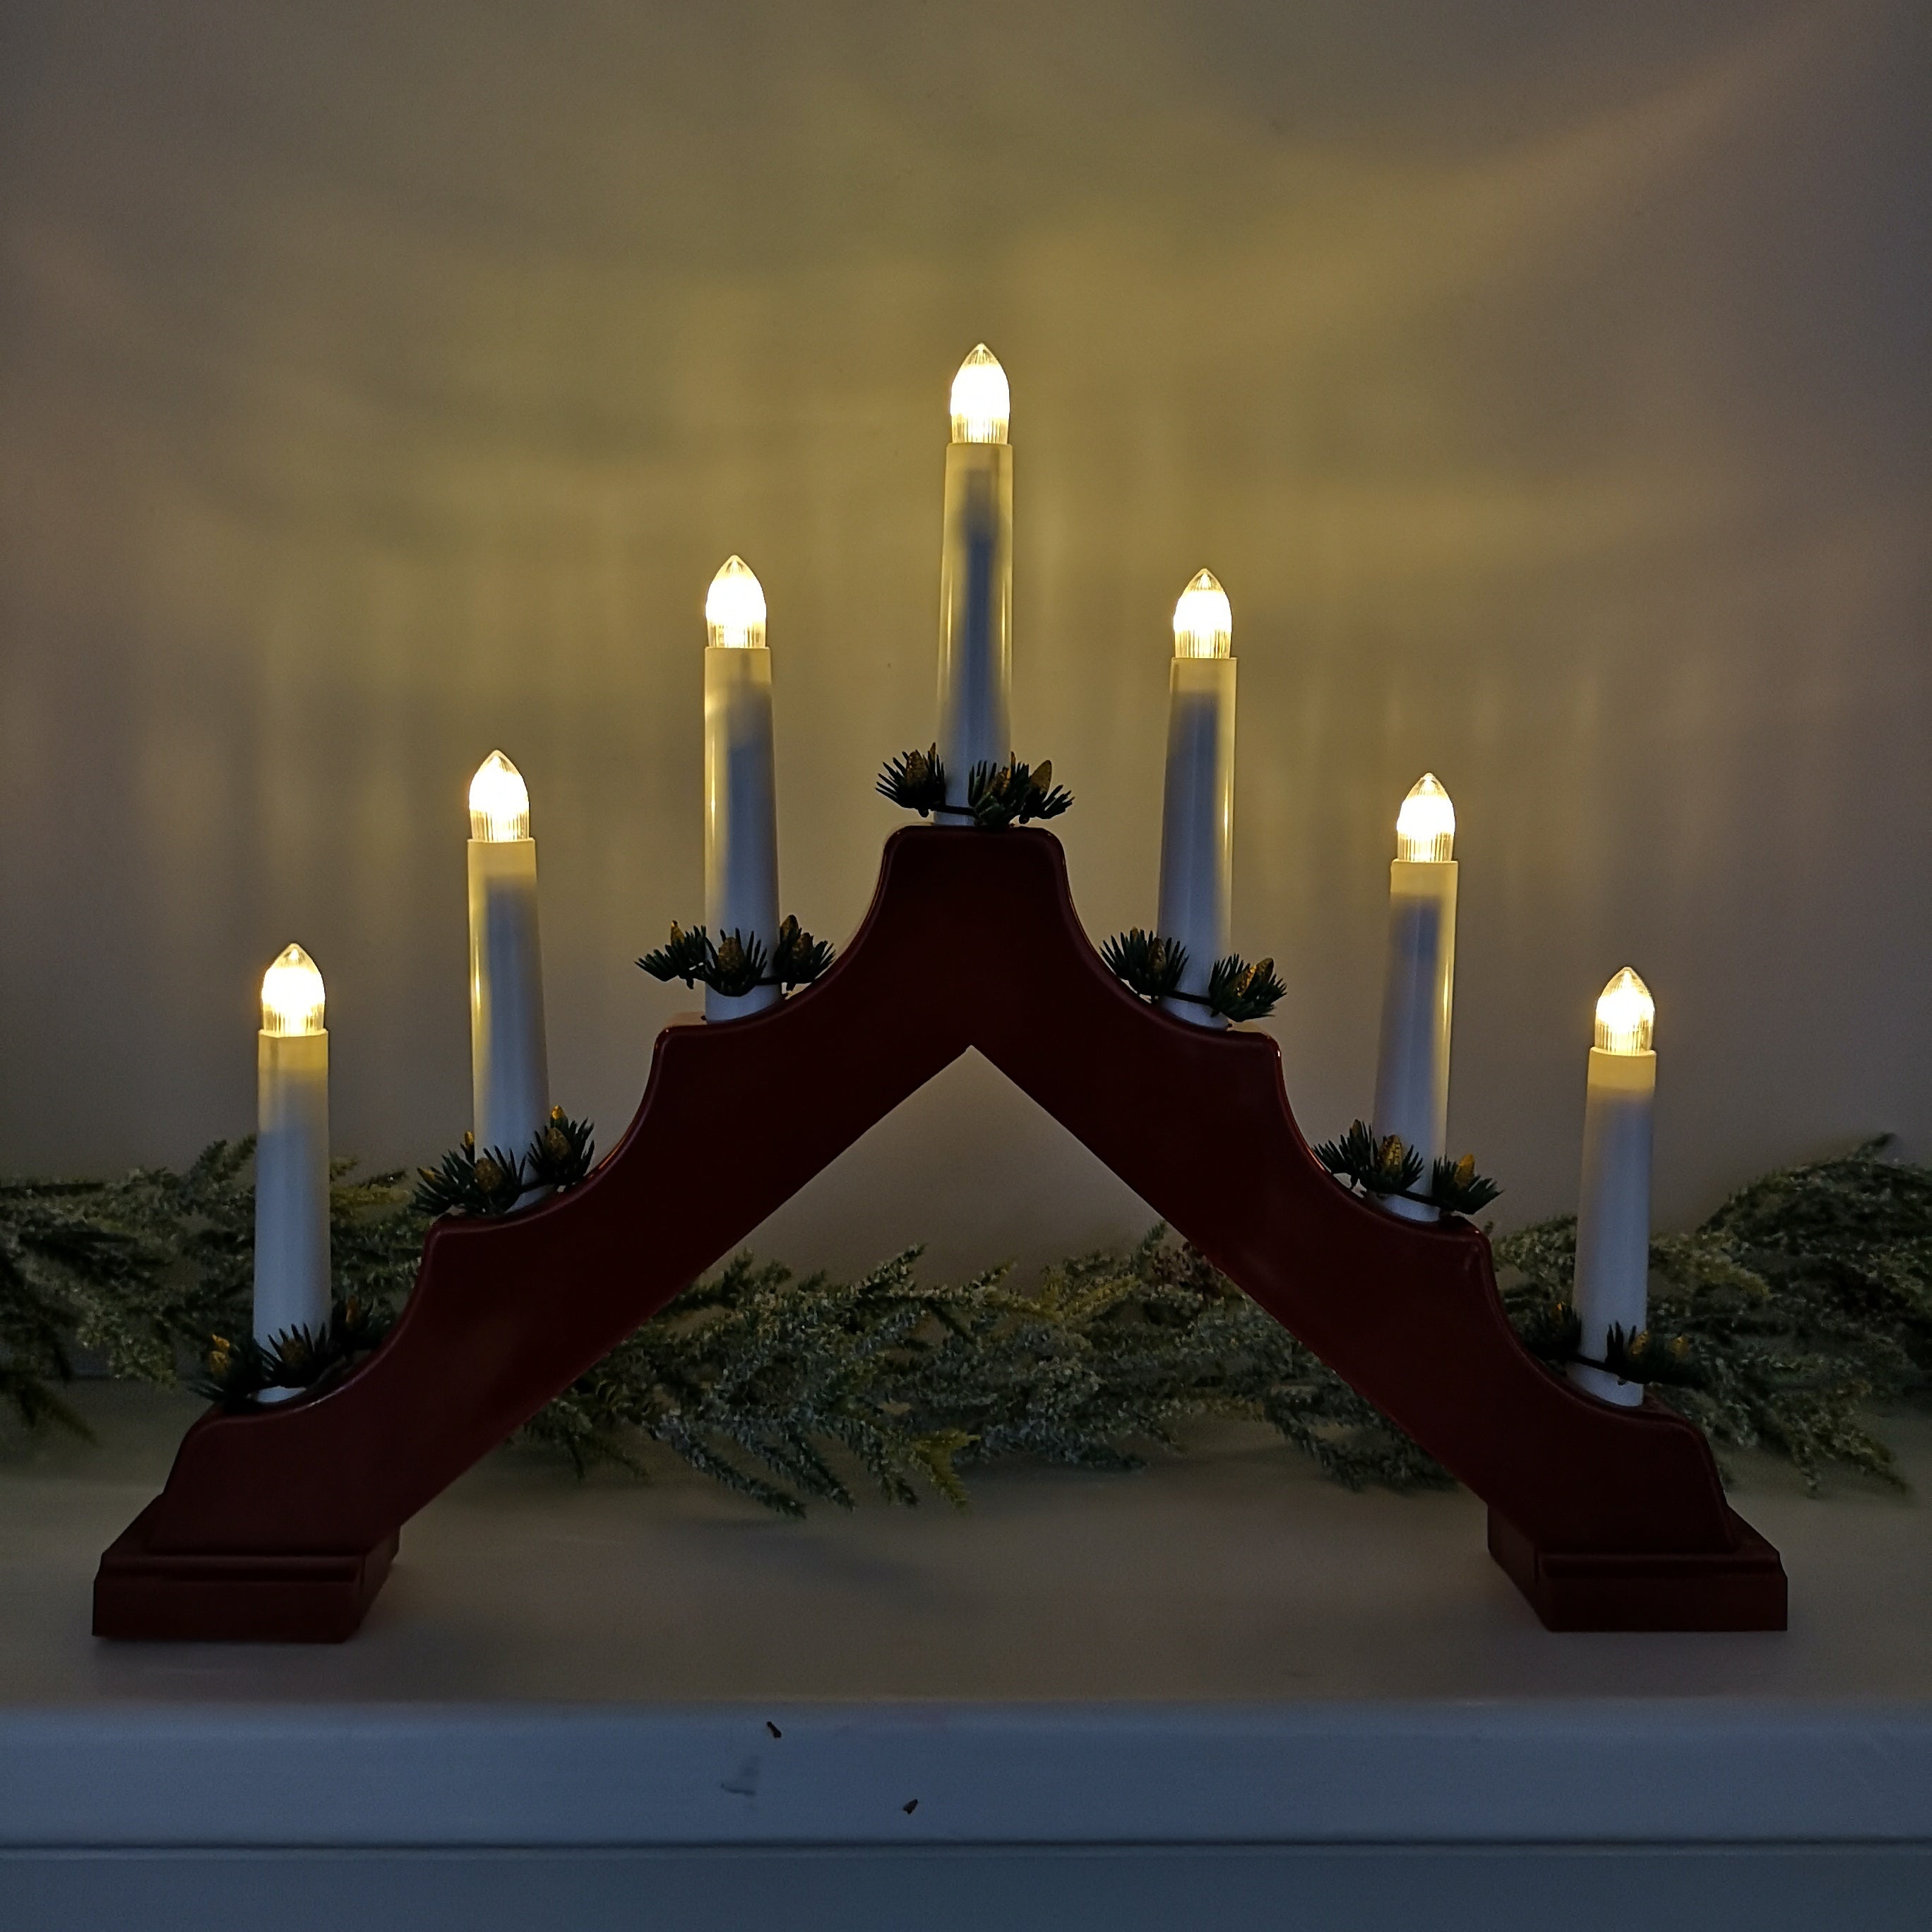 40cm Festive Christmas Candlebridge with 7 Bulbs in Red Battery Operated